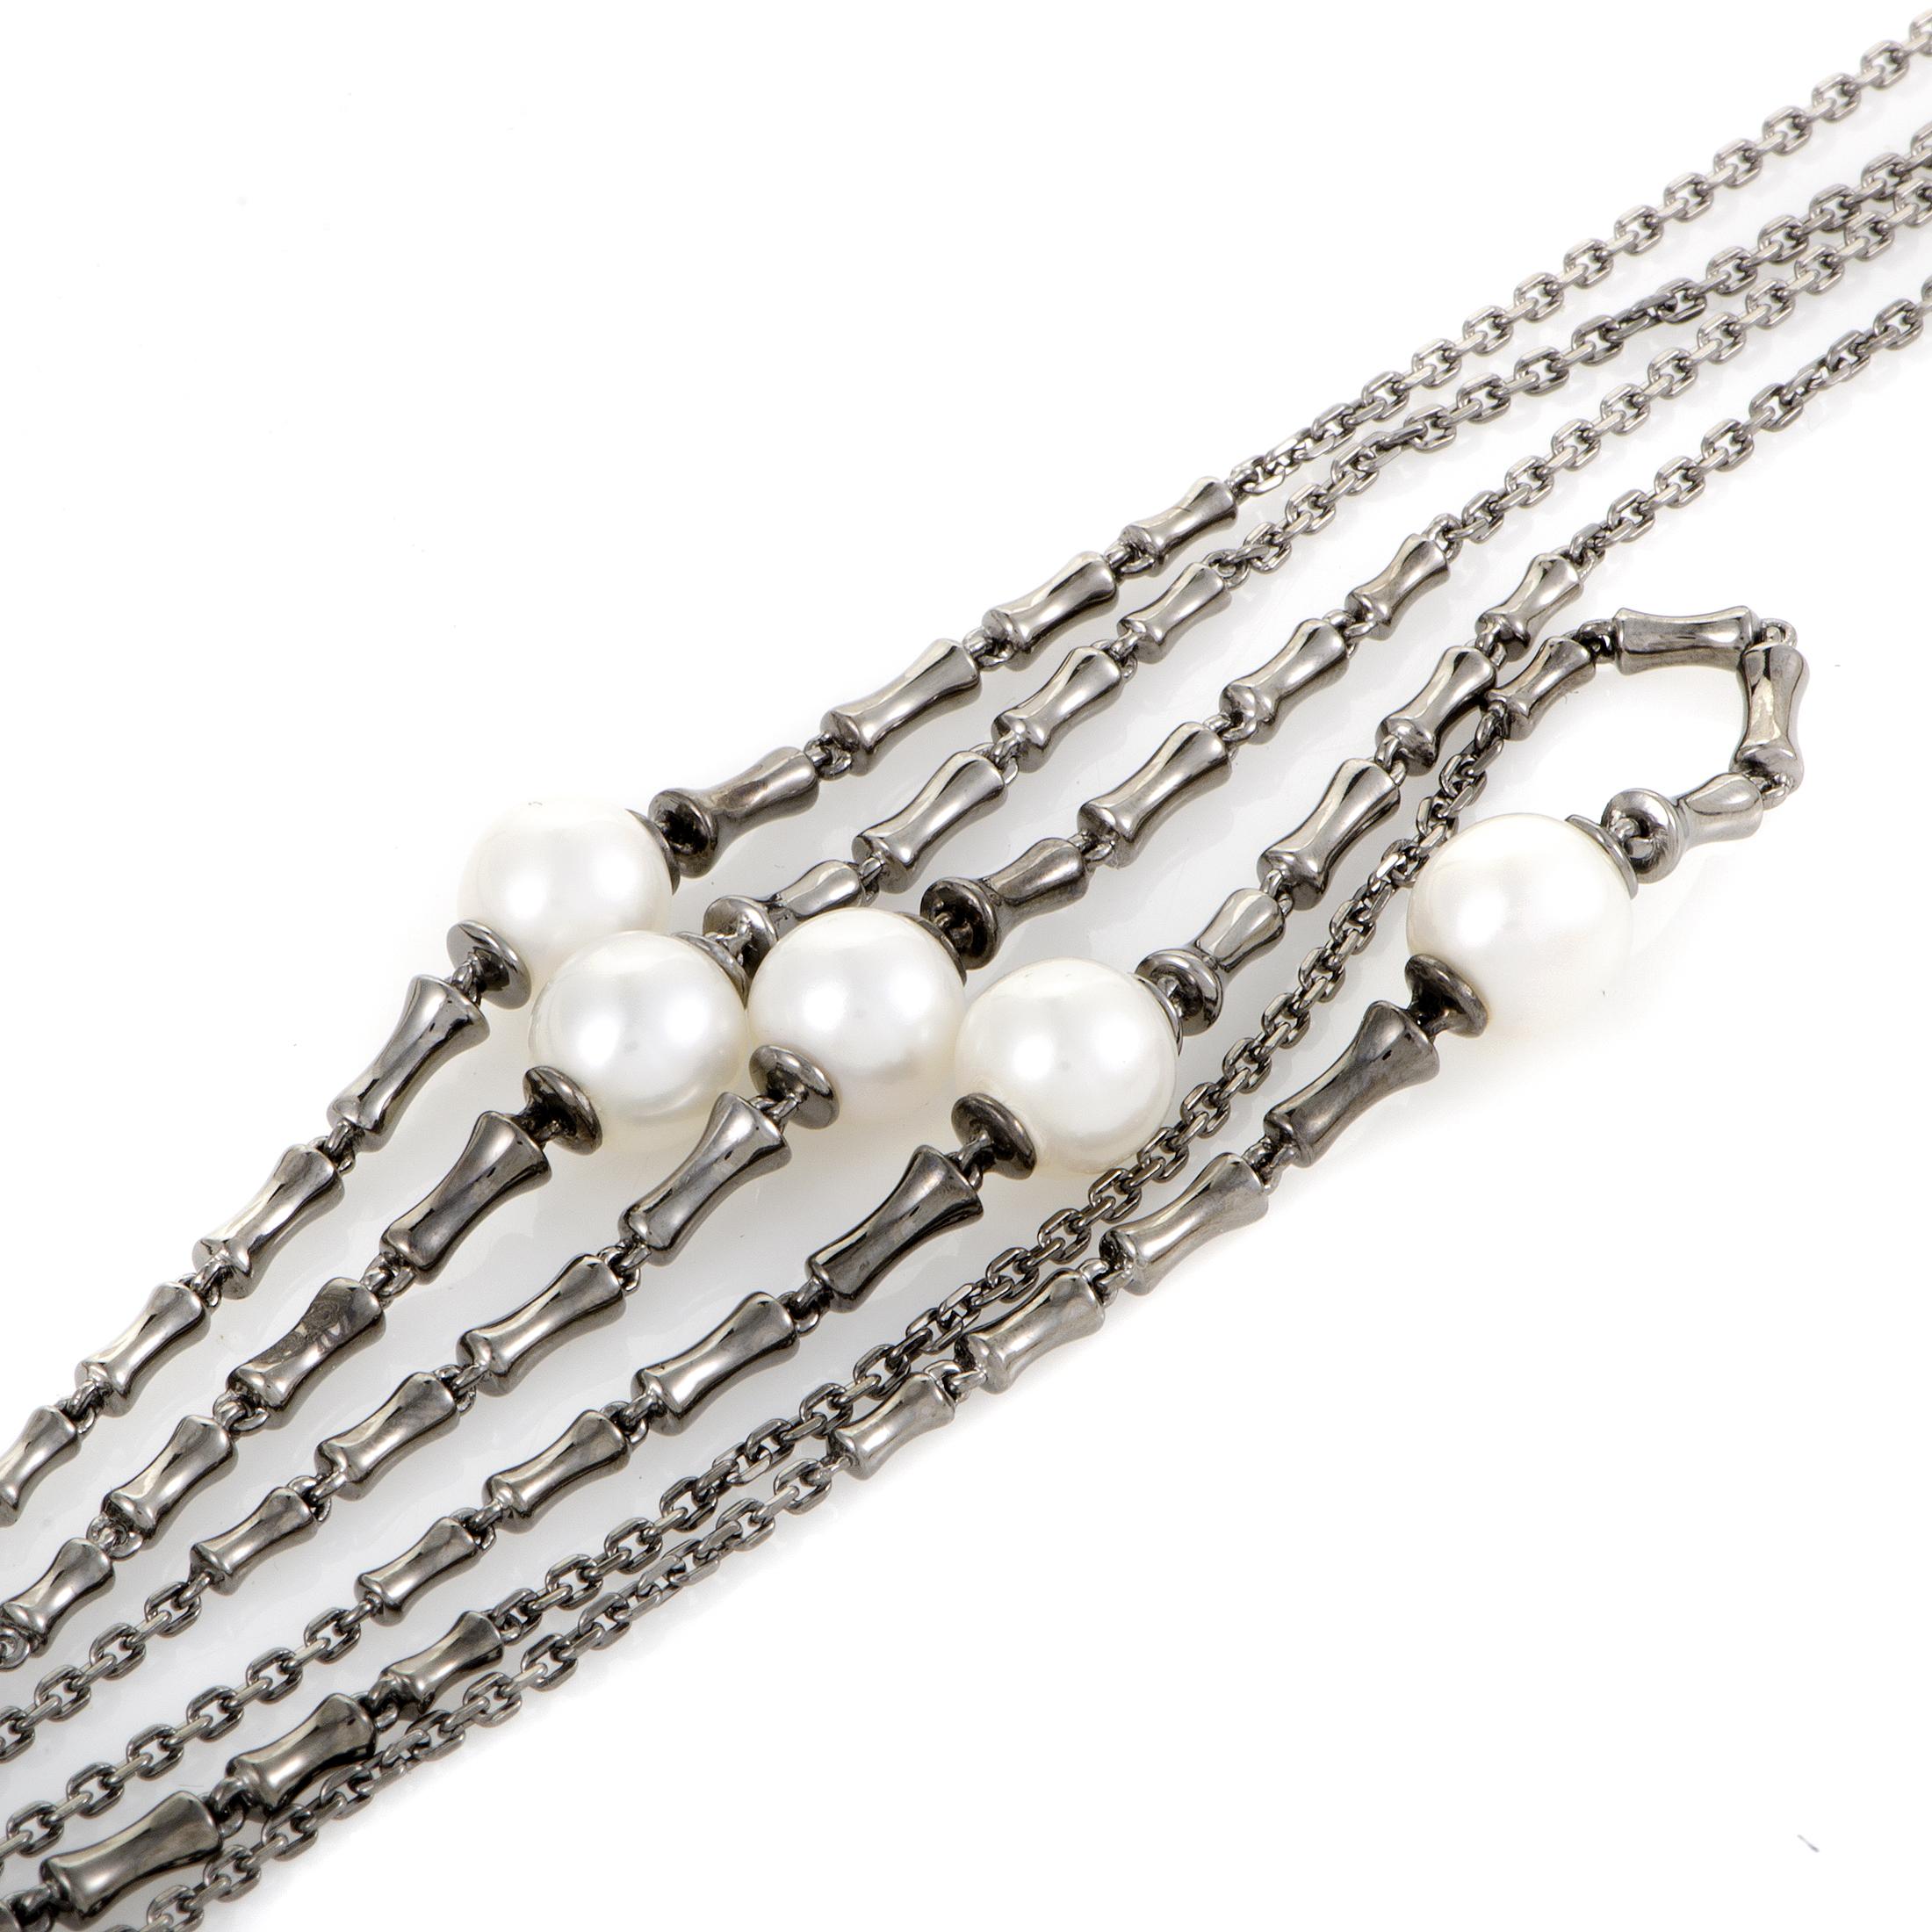 Women's Stephen Webster Jewels Verne Womens Blackend Silver and Pearl Sautoir Necklace